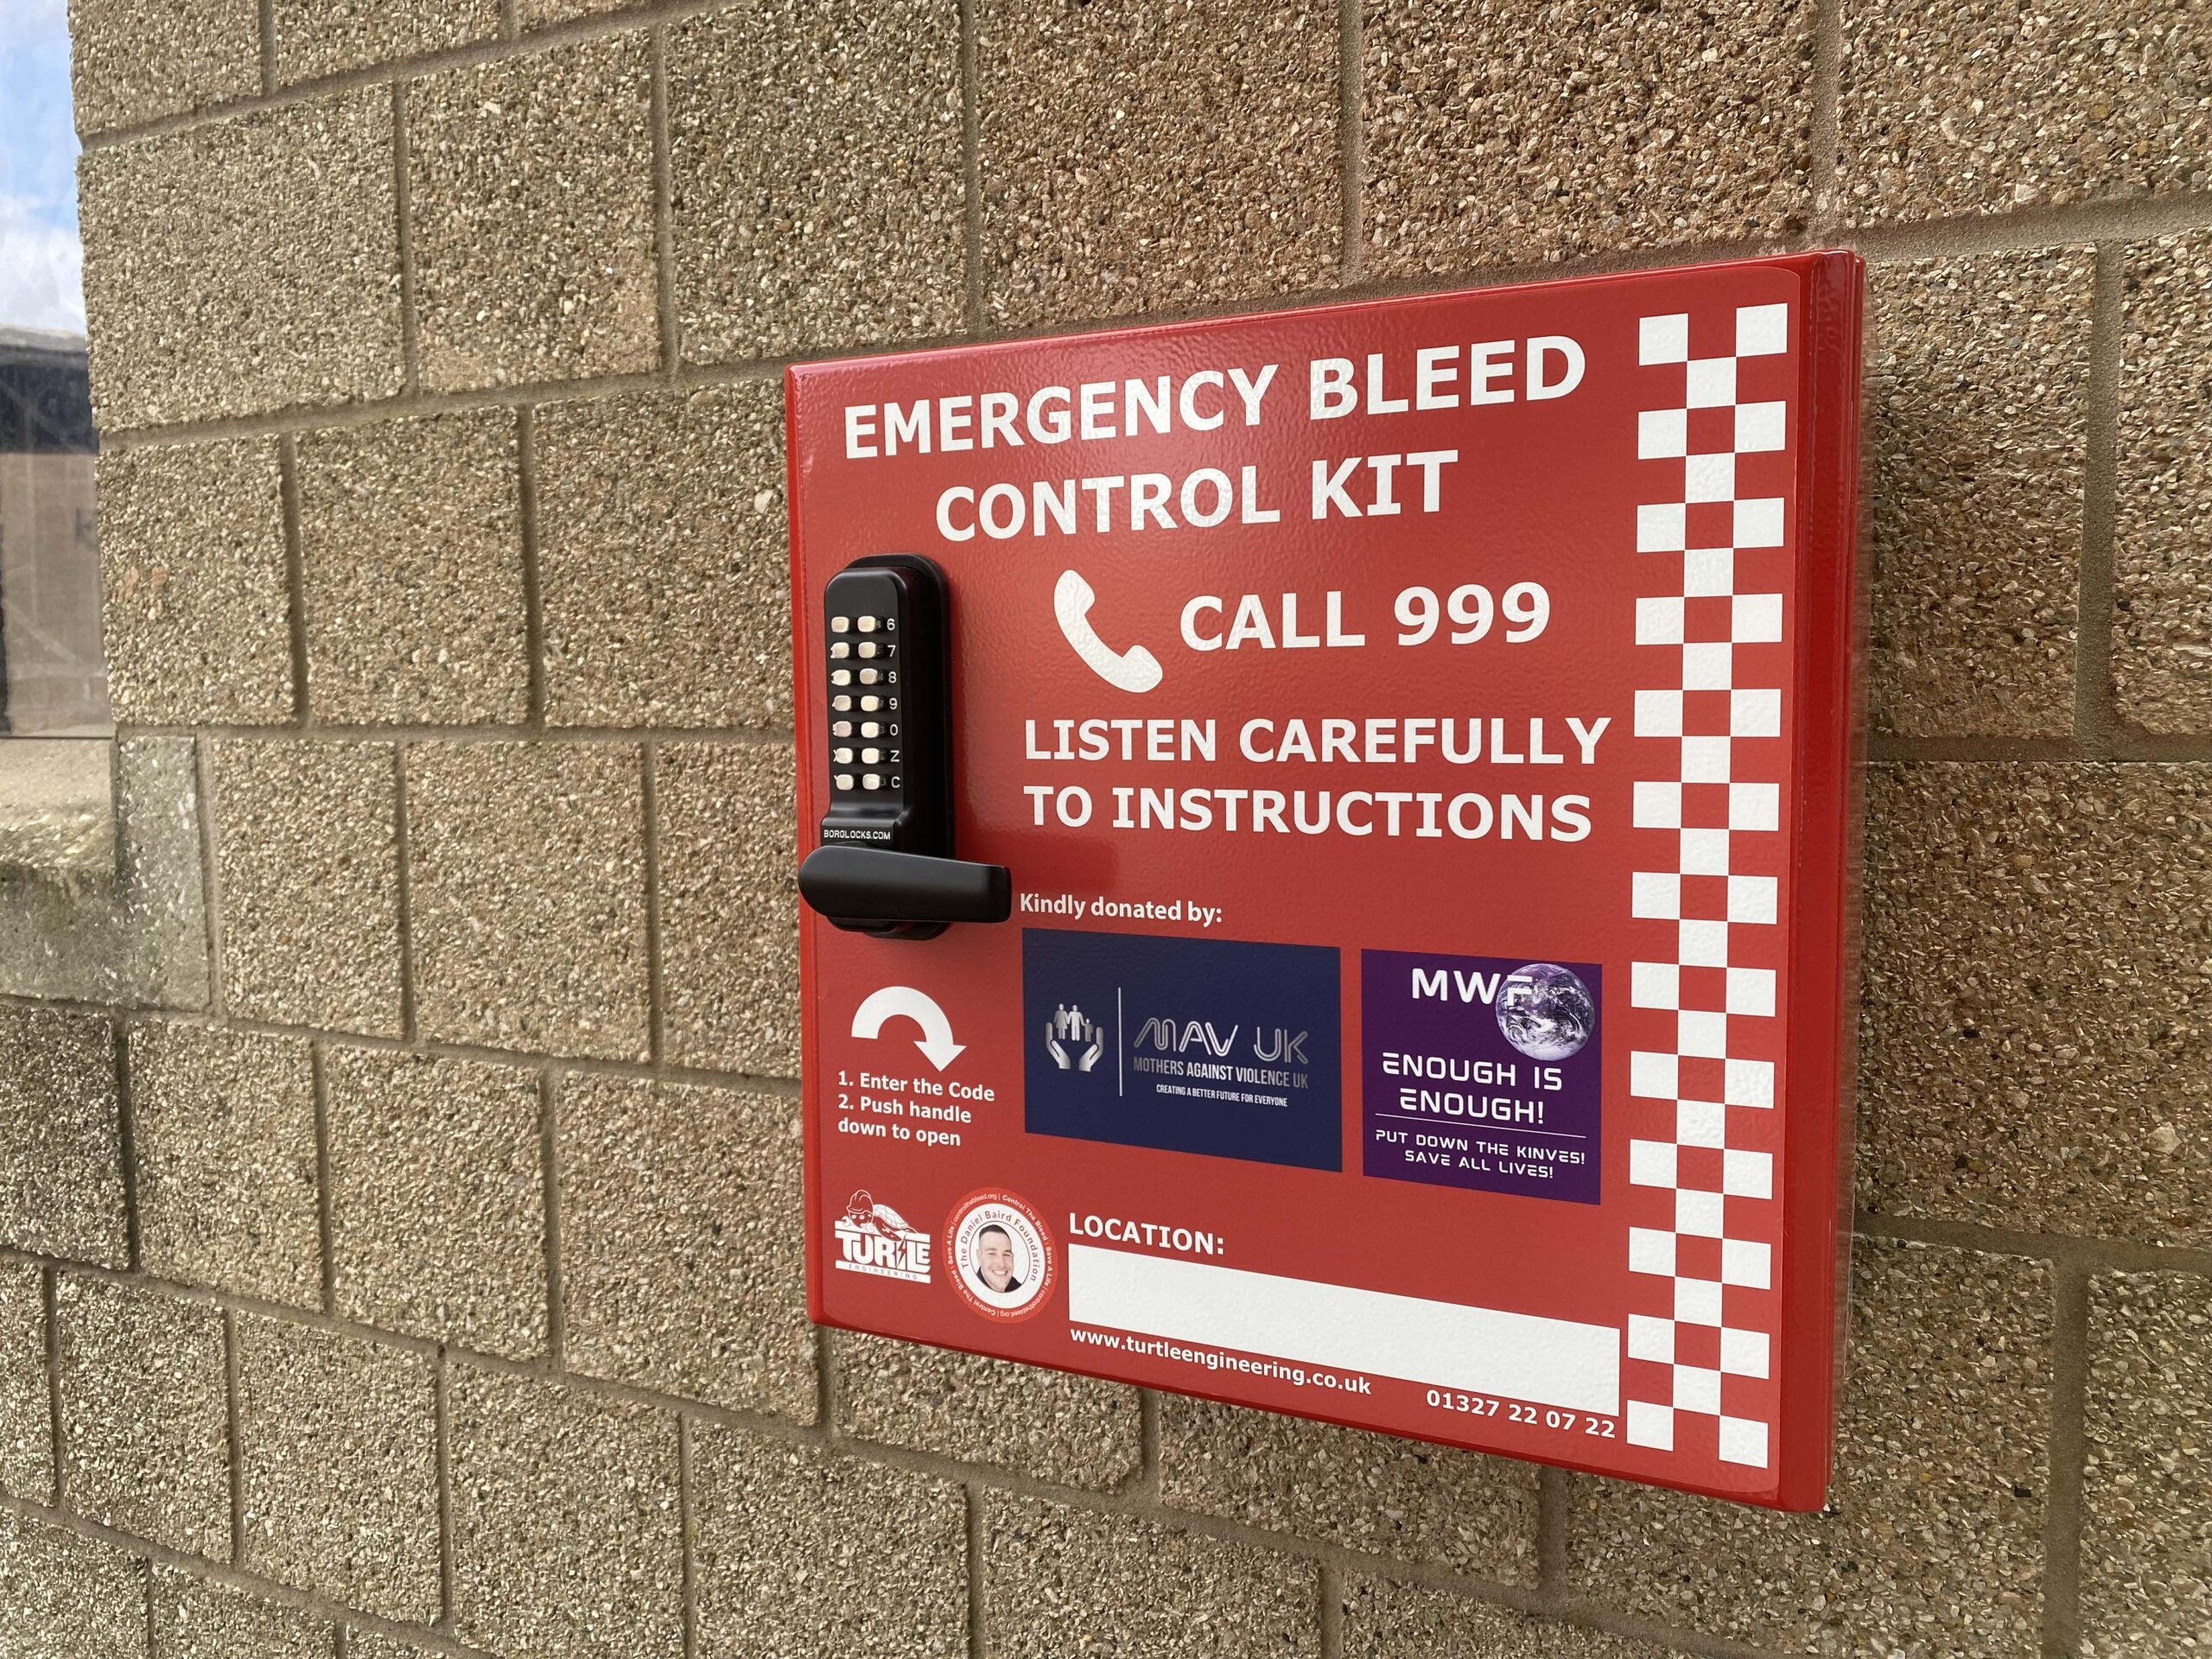 Red emergency bleed control box with white writing and a pin code